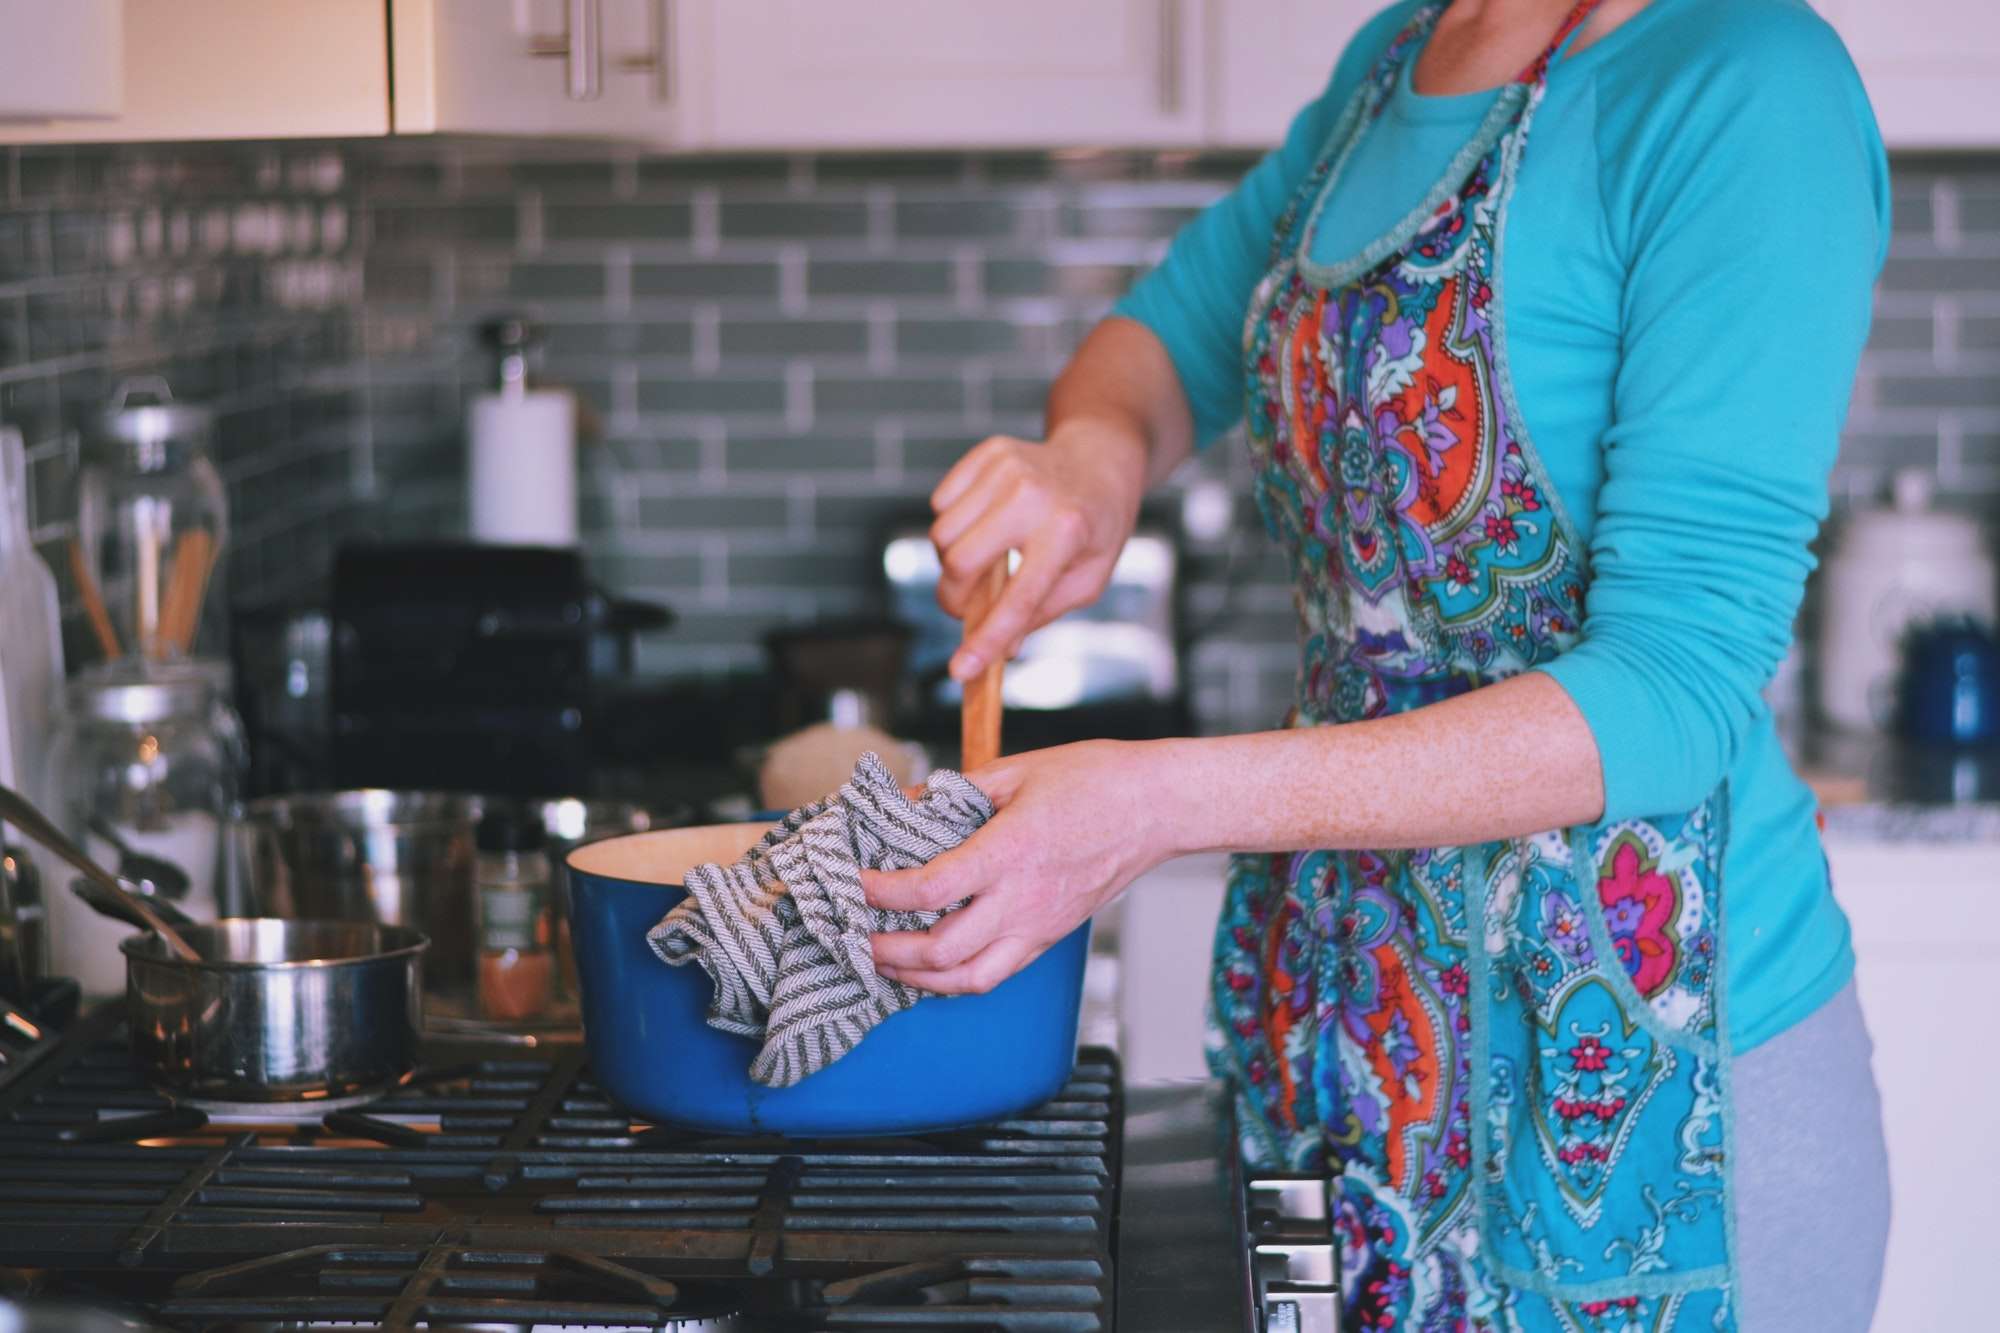 Woman is cooking dinner in a blue cast iron pot, Dutch oven, on a stove